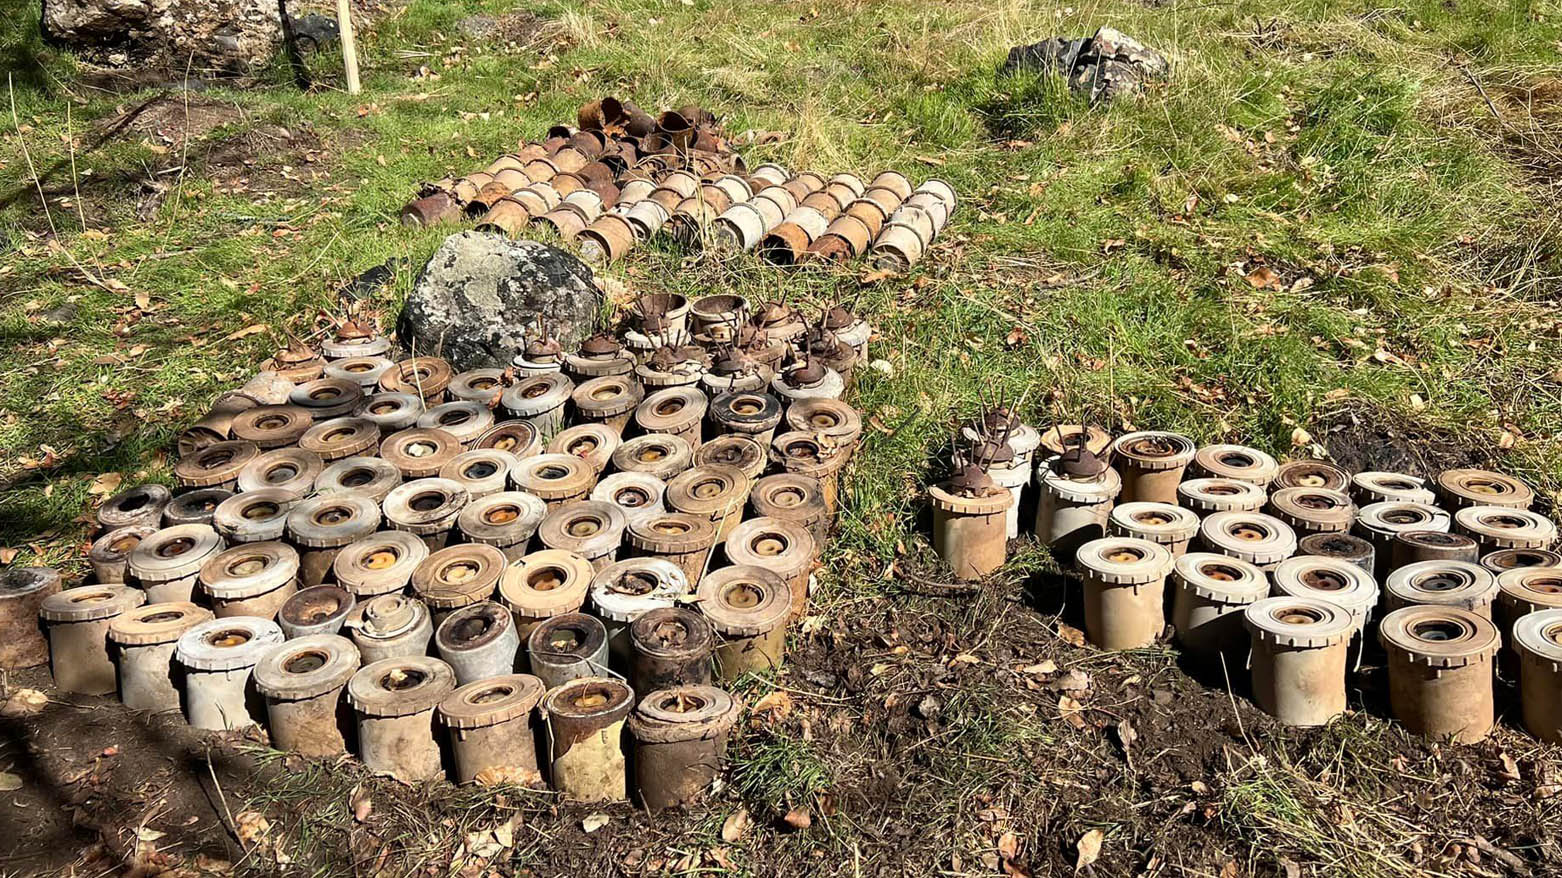 Some of the landmines defused by the Mine Action Agency in cooperation with the Slovenia-based Enhancing Human Security (ITF). (Photo: KRG Mine Action Agency)